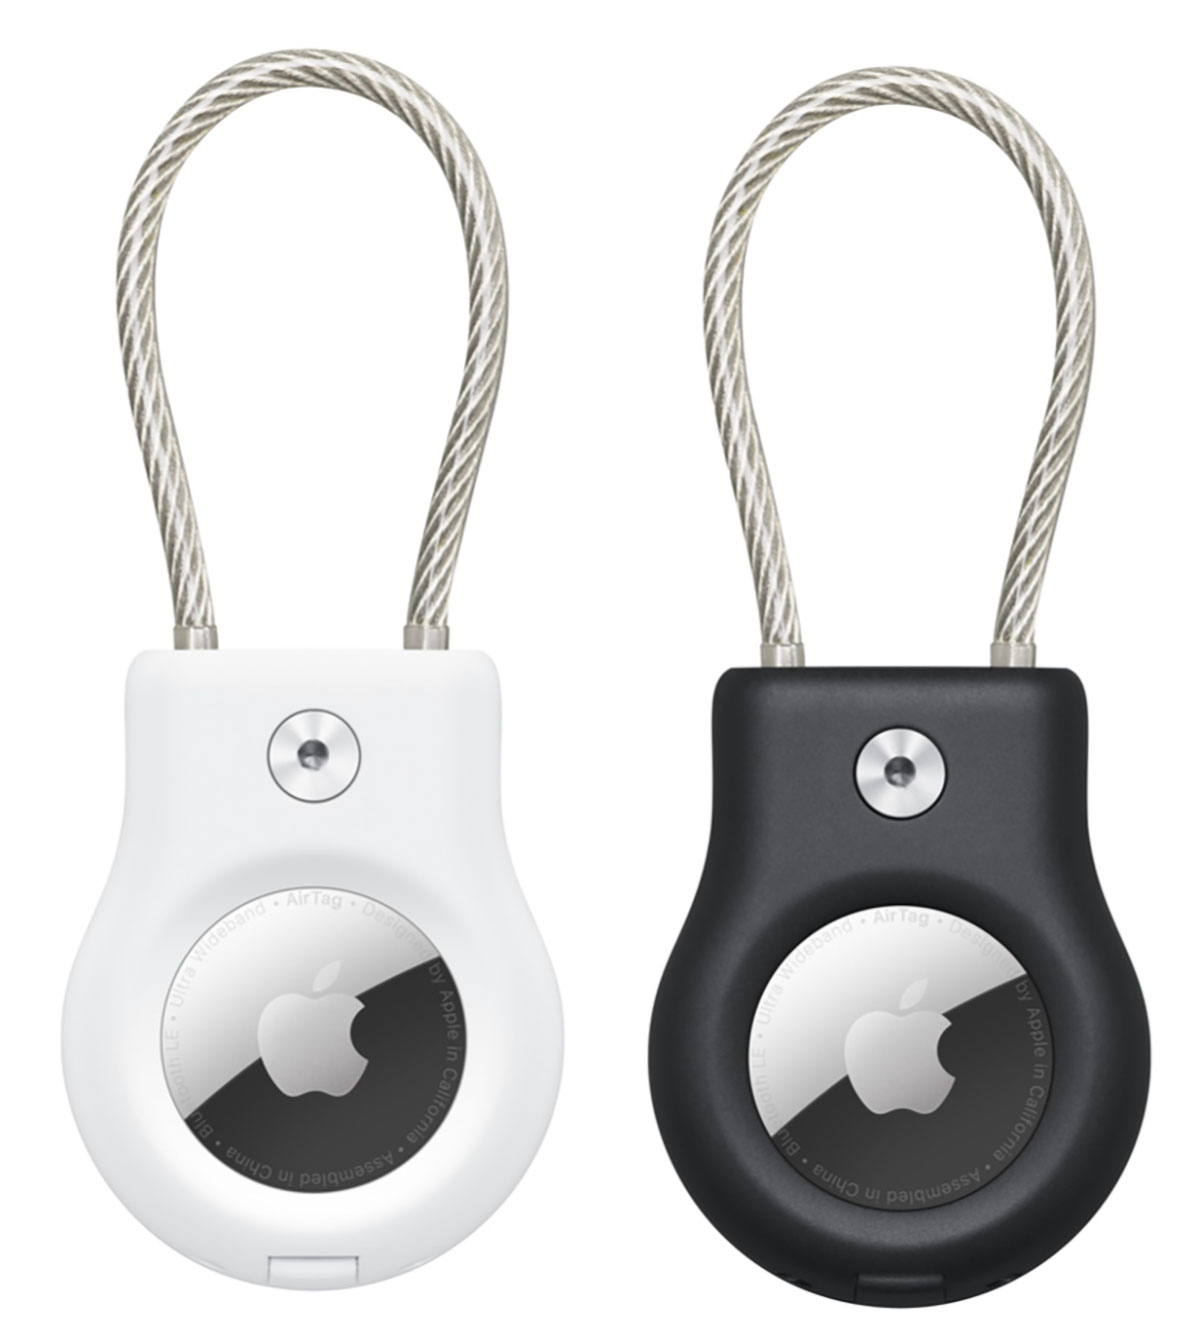 The 7 Best AirTag Holder Cases with Keychain (2021) - ESR Blog